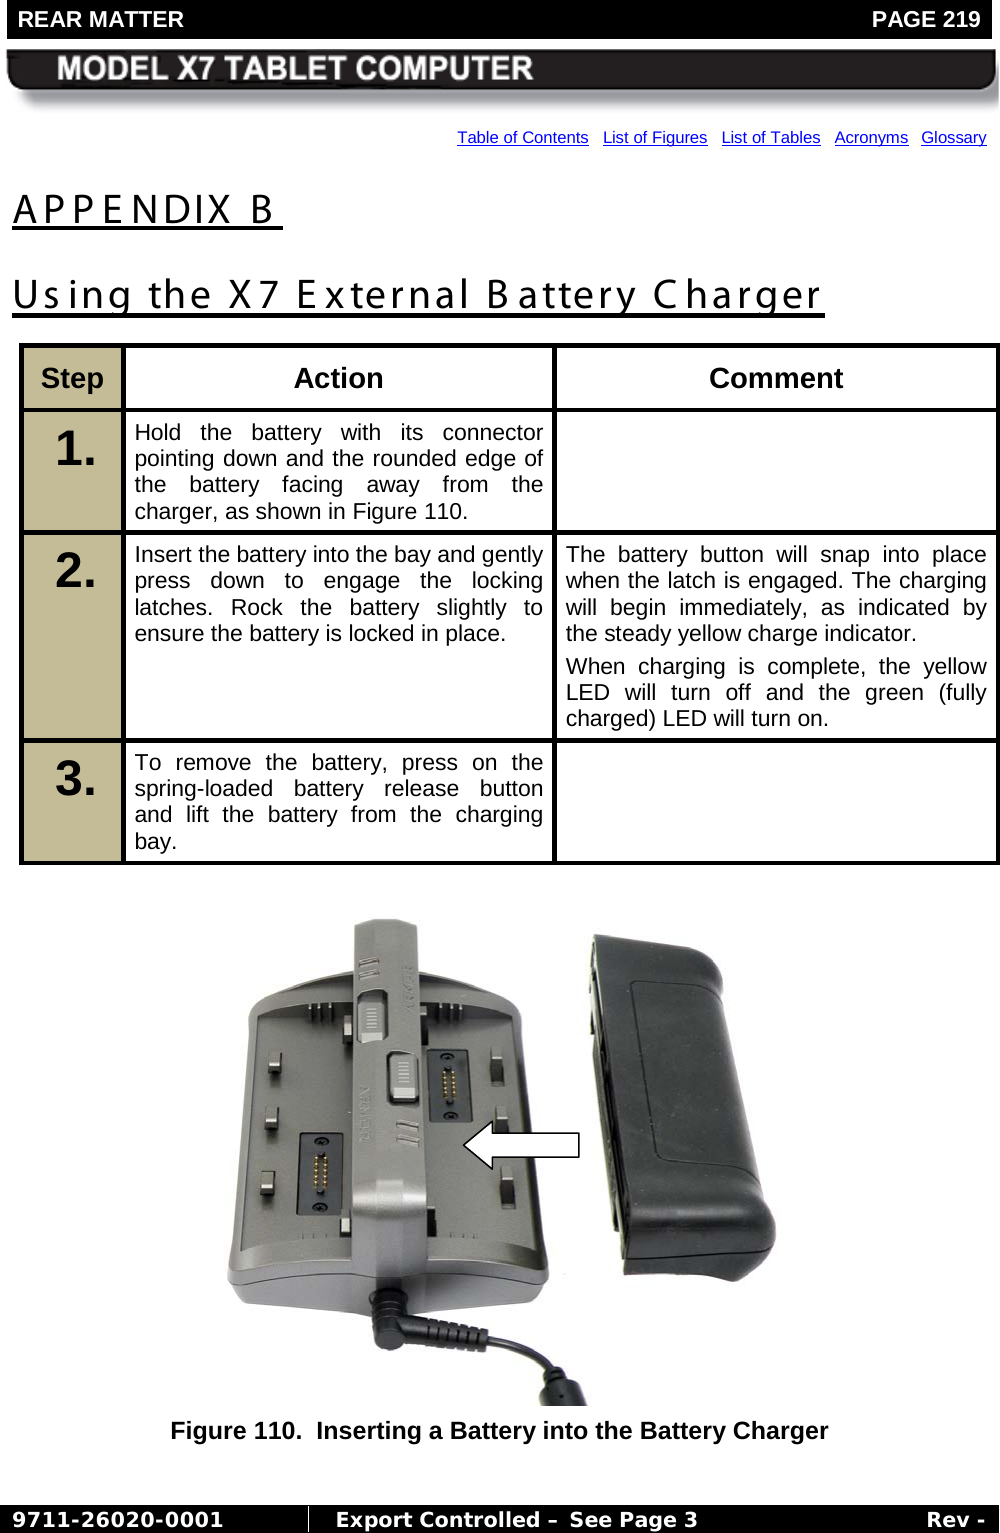 REAR MATTER   PAGE 219        9711-26020-0001  Export Controlled – See Page 3 Rev - Table of Contents   List of Figures   List of Tables   Acronyms  Glossary APPENDIX B Using the X7 External B attery Charger Step  Action Comment 1.  Hold the battery with its connector pointing down and the rounded edge of the battery facing away from the charger, as shown in Figure 110.  2.  Insert the battery into the bay and gently press down to engage the locking latches. Rock the battery slightly to ensure the battery is locked in place. The battery button will snap into place when the latch is engaged. The charging will begin immediately, as indicated by the steady yellow charge indicator. When charging is complete, the yellow LED will turn off and the green (fully charged) LED will turn on. 3.  To remove the battery, press on the spring-loaded battery release button and lift the battery from the charging bay.    Figure 110.  Inserting a Battery into the Battery Charger  